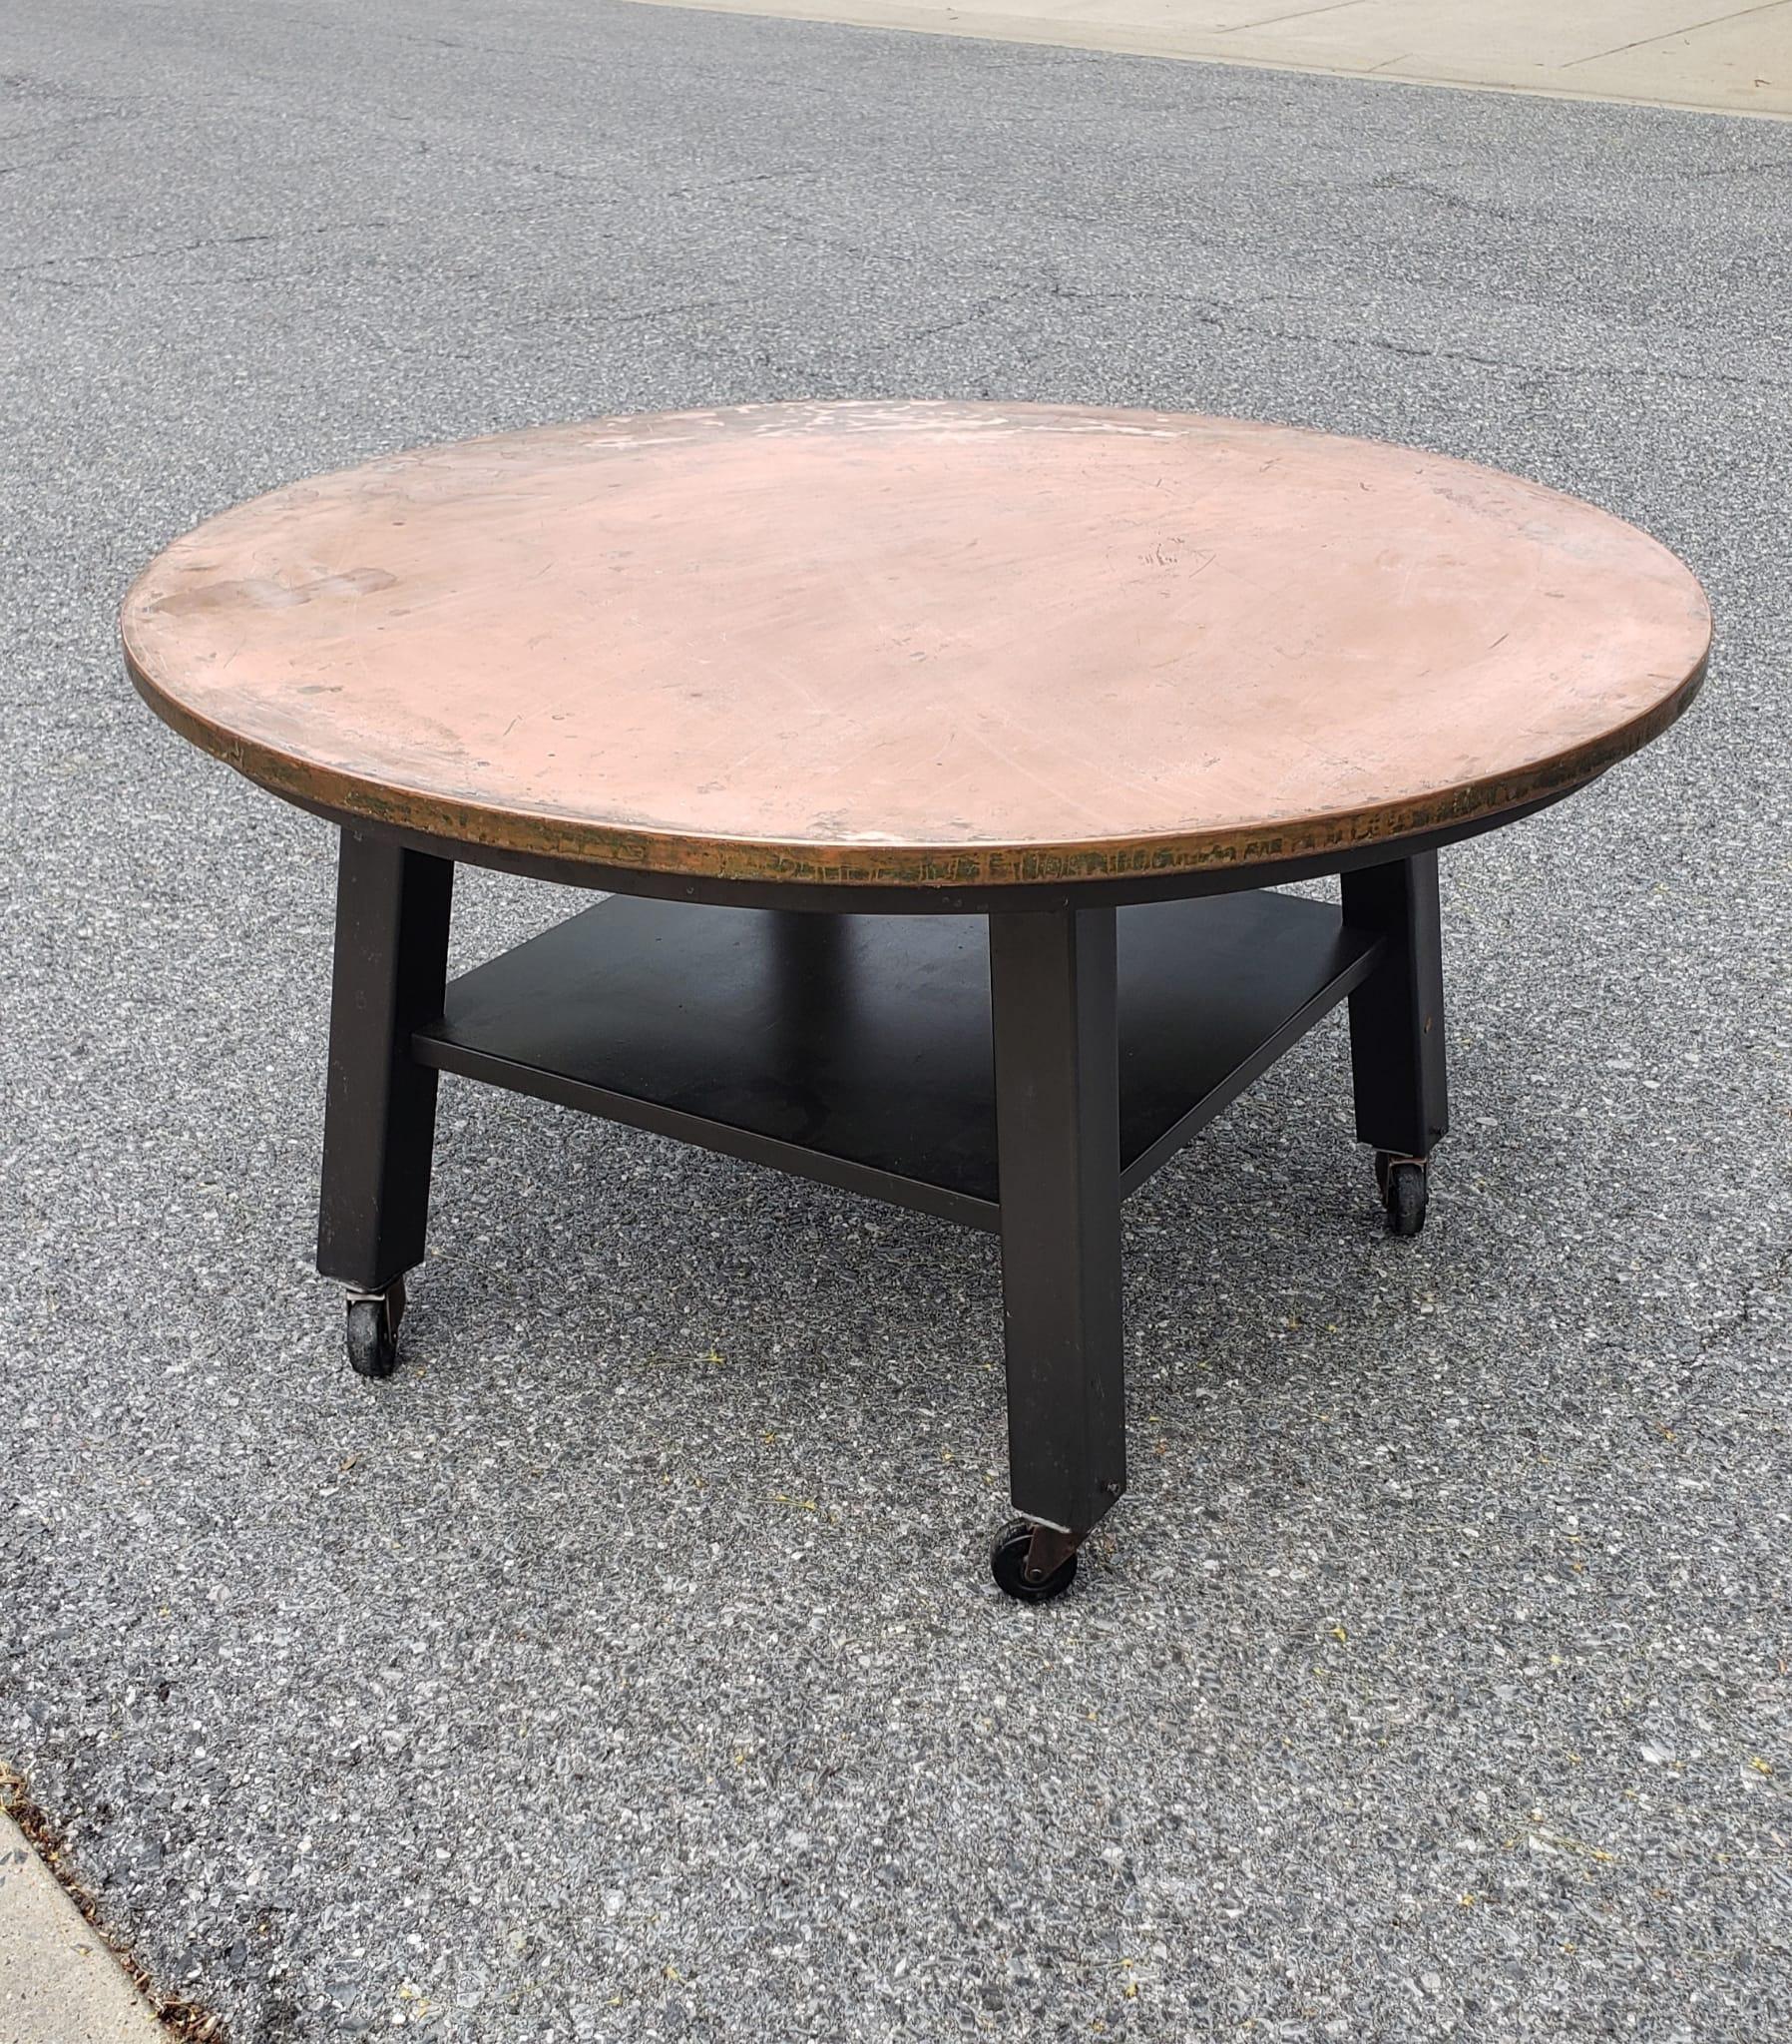 Ethan Allen Outdoor Copper Top Metal Rolling Outdoor or Indoor Coffee or cocktail Table. Copper Top. Very sturdy. Some patina on copper
Table measures 36